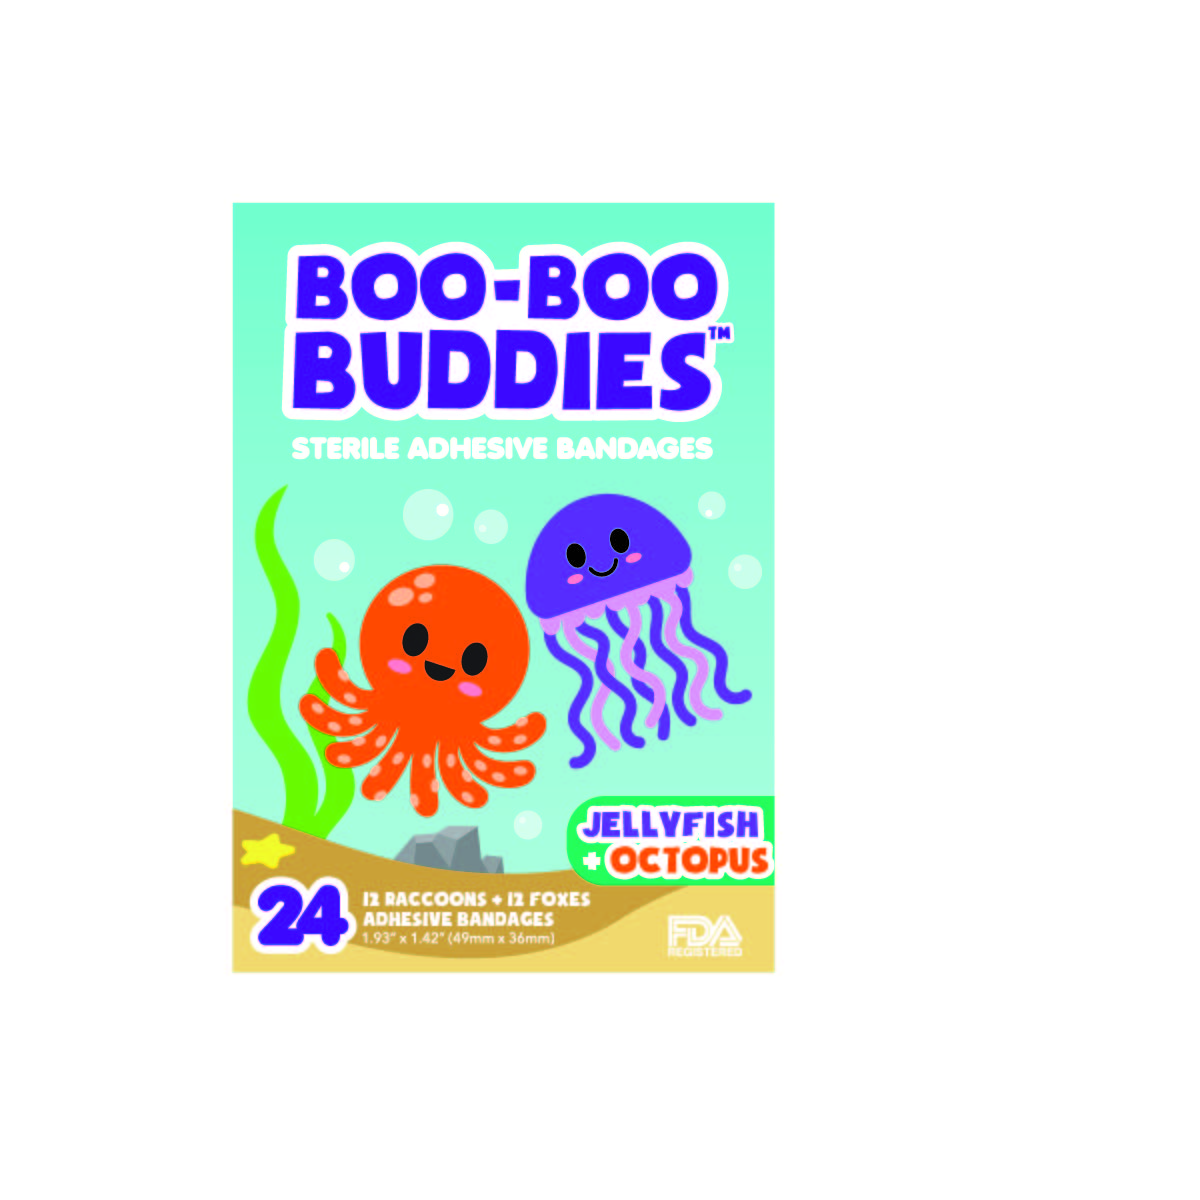 Boo-Boo Buddies Jellyfish and Octopus Bandages